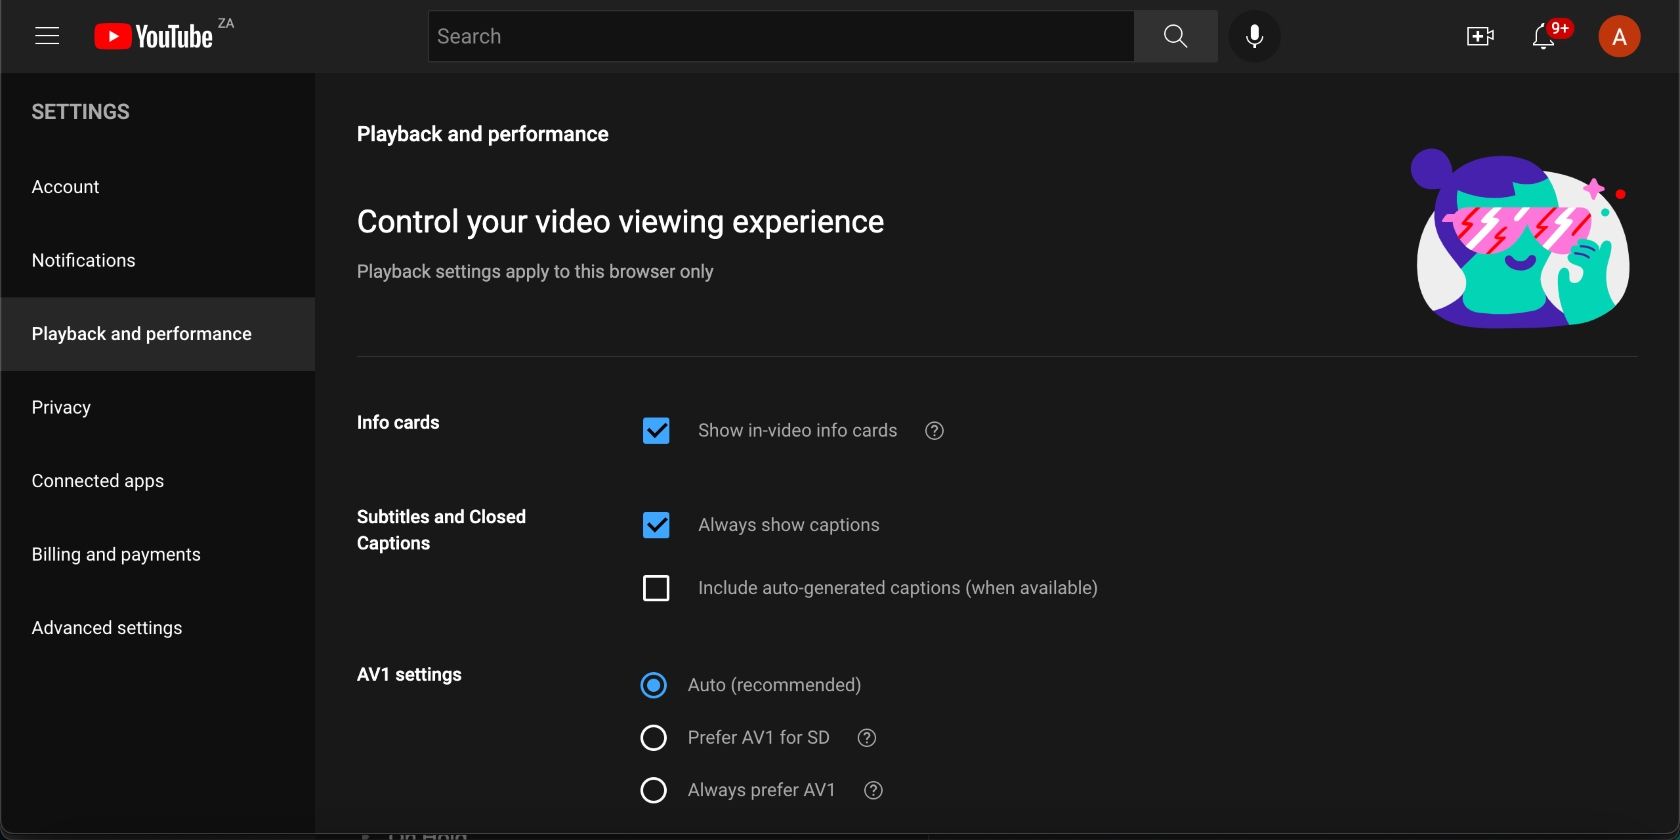 How to Enable or Disable Closed Captions on YouTube